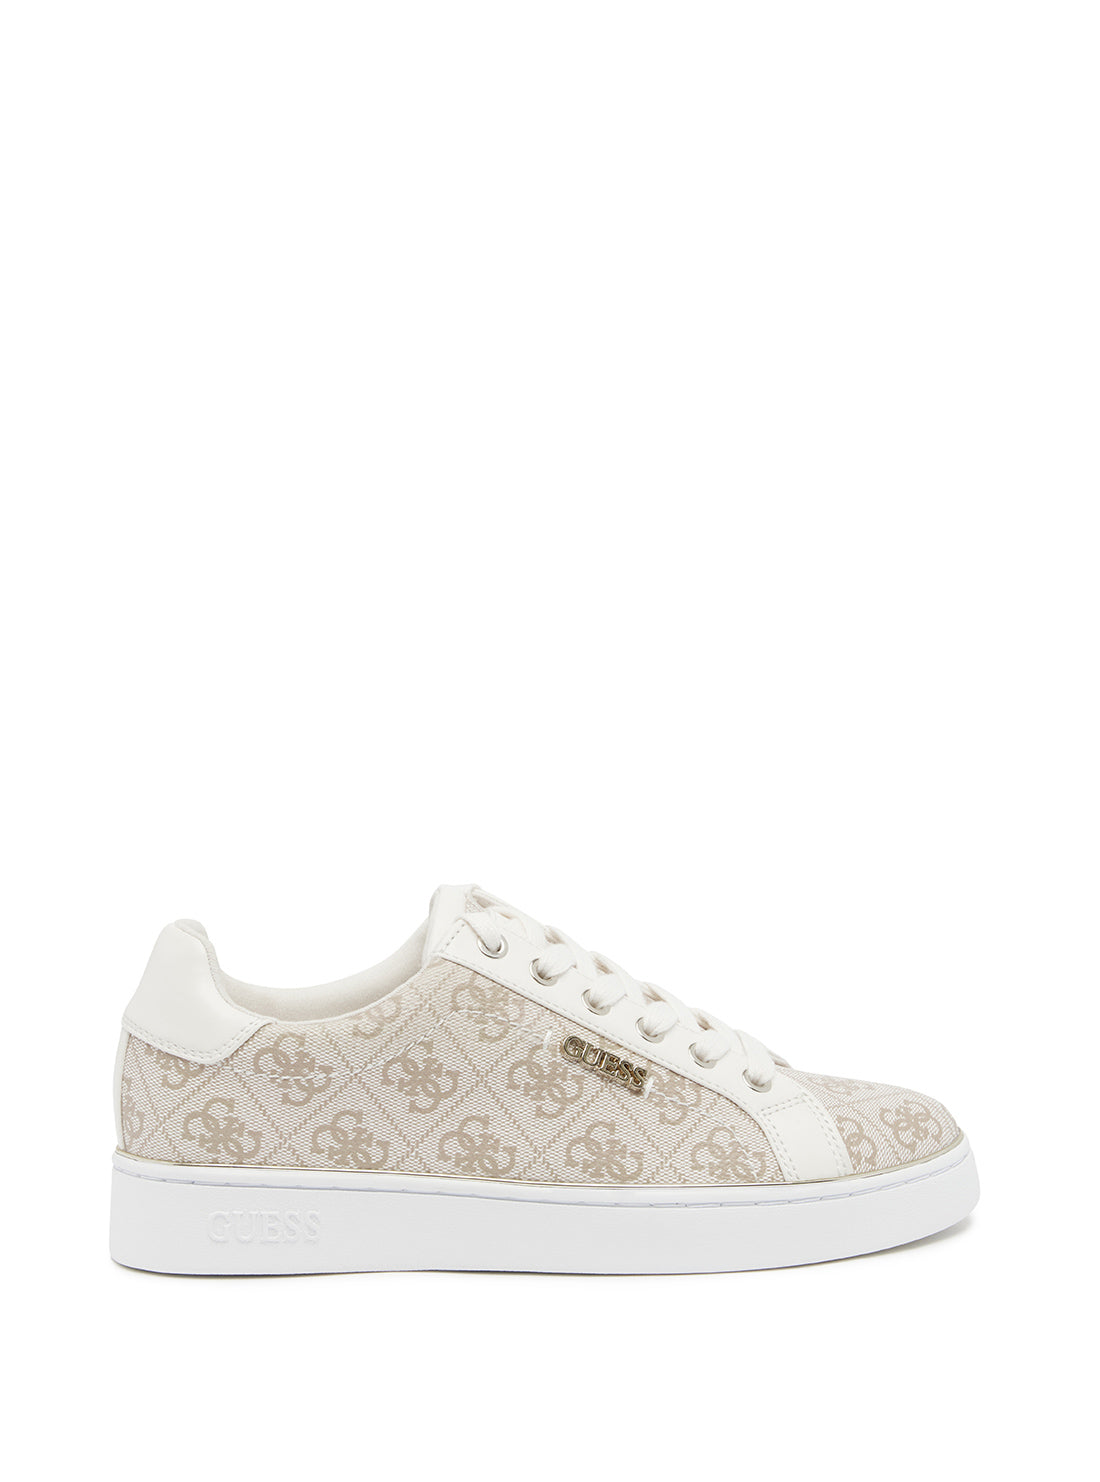 Cream Logo Beckie Sneakers | GUESS Women's Shoes | side view